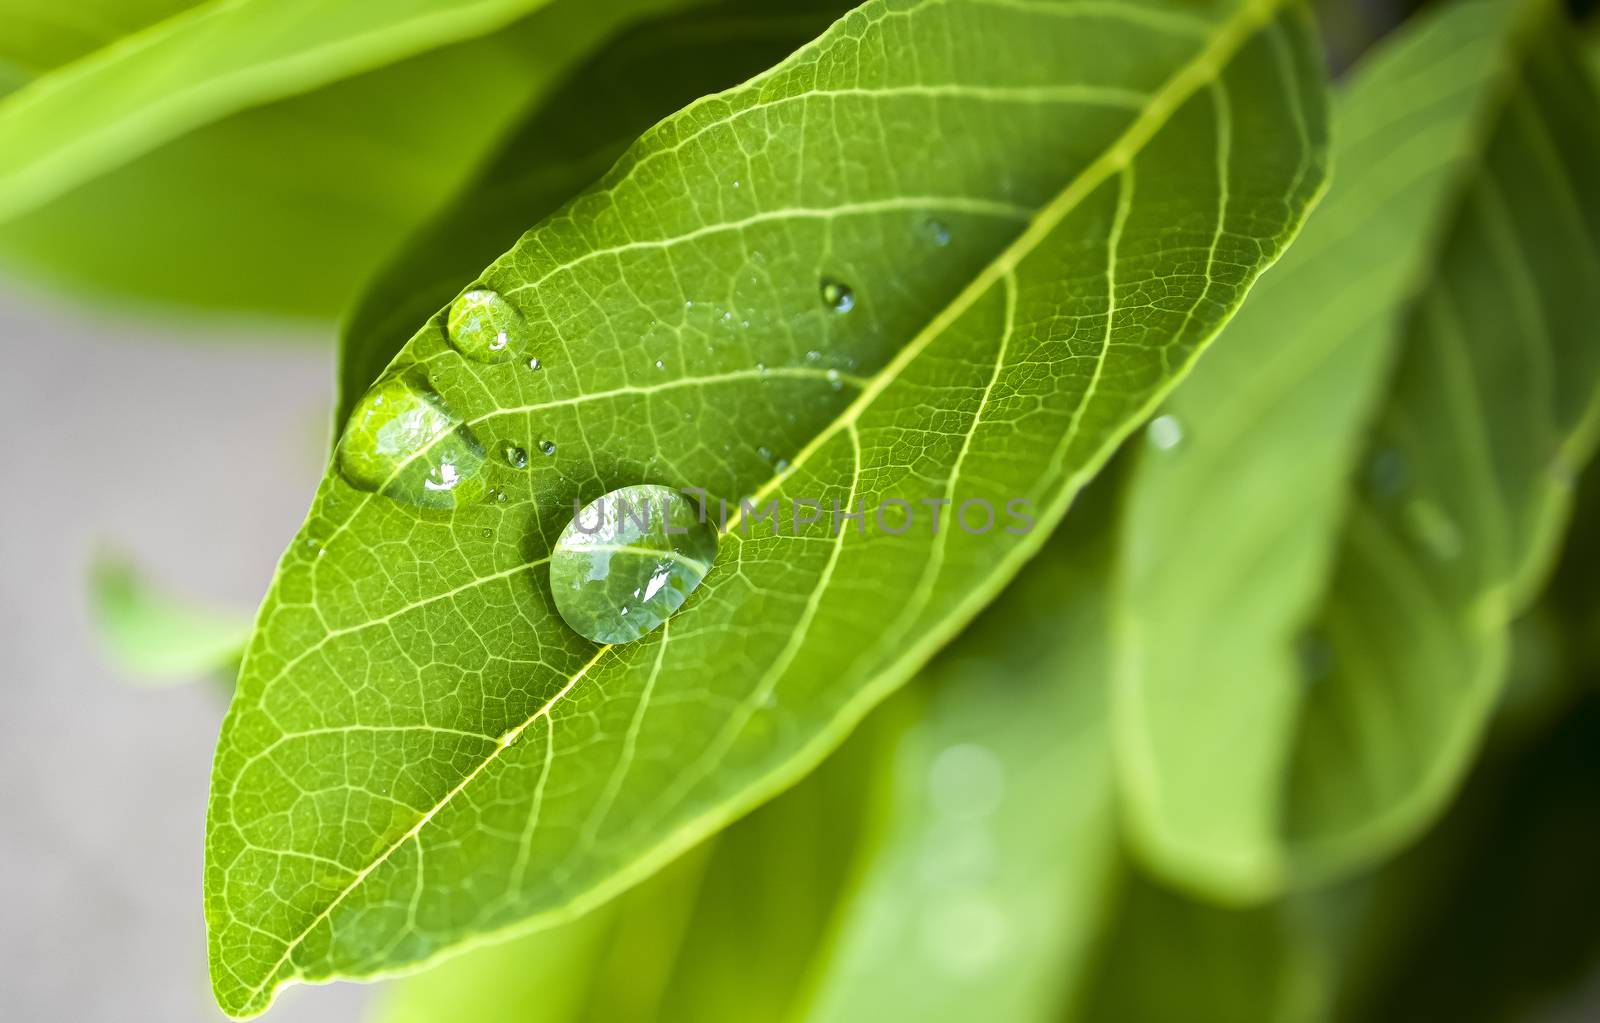 Closeup of drops of water on green leaves.